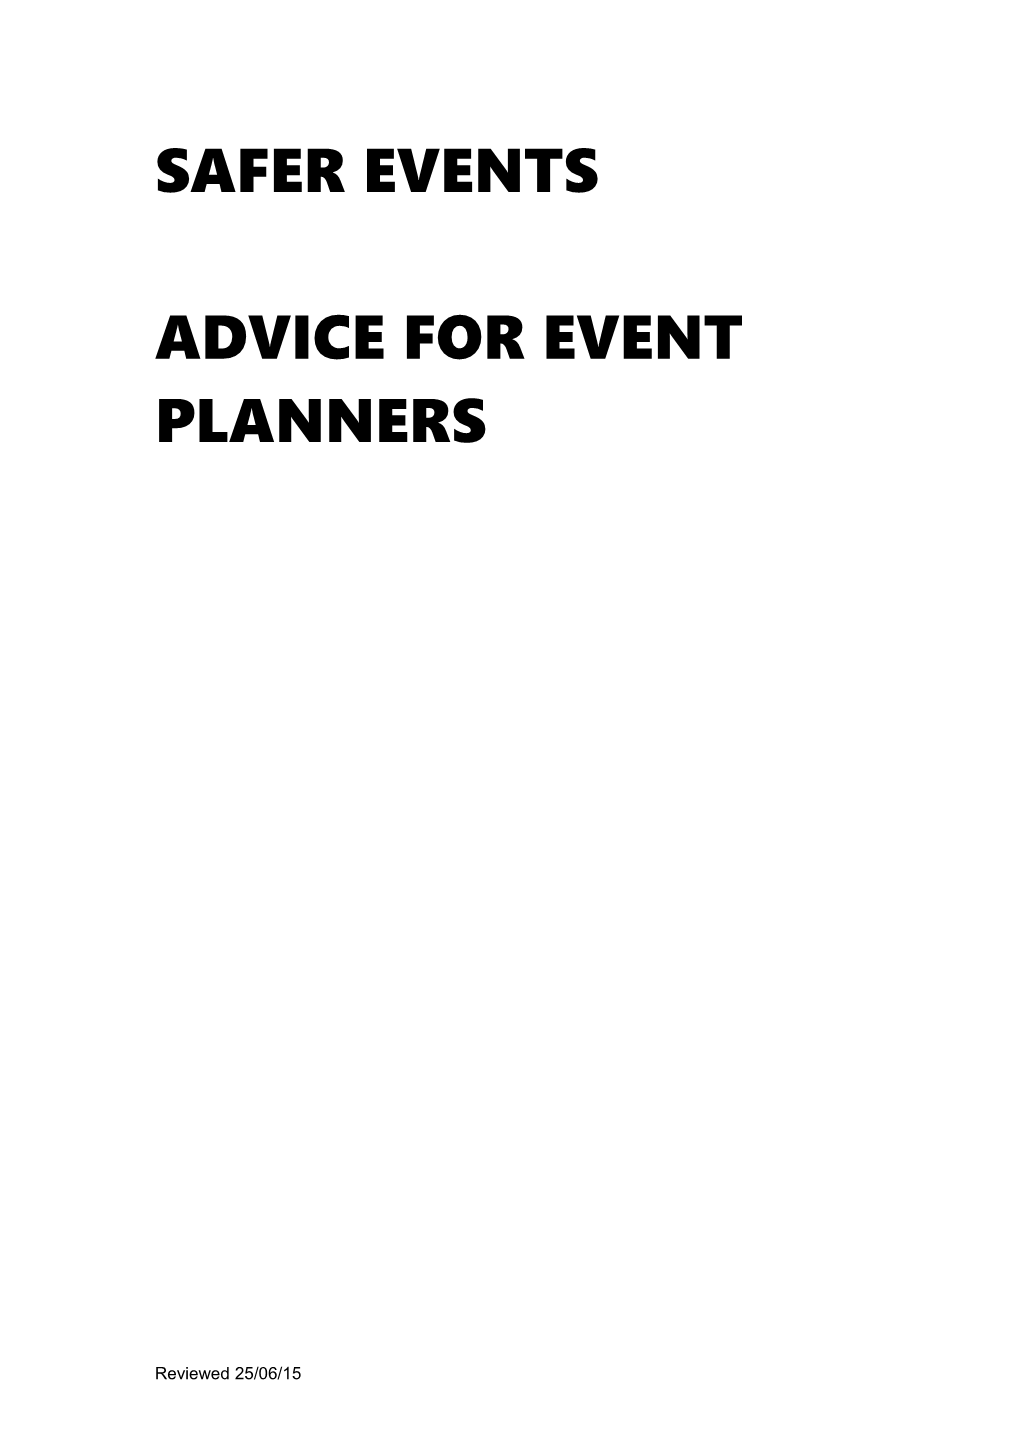 Advice for Event Planners